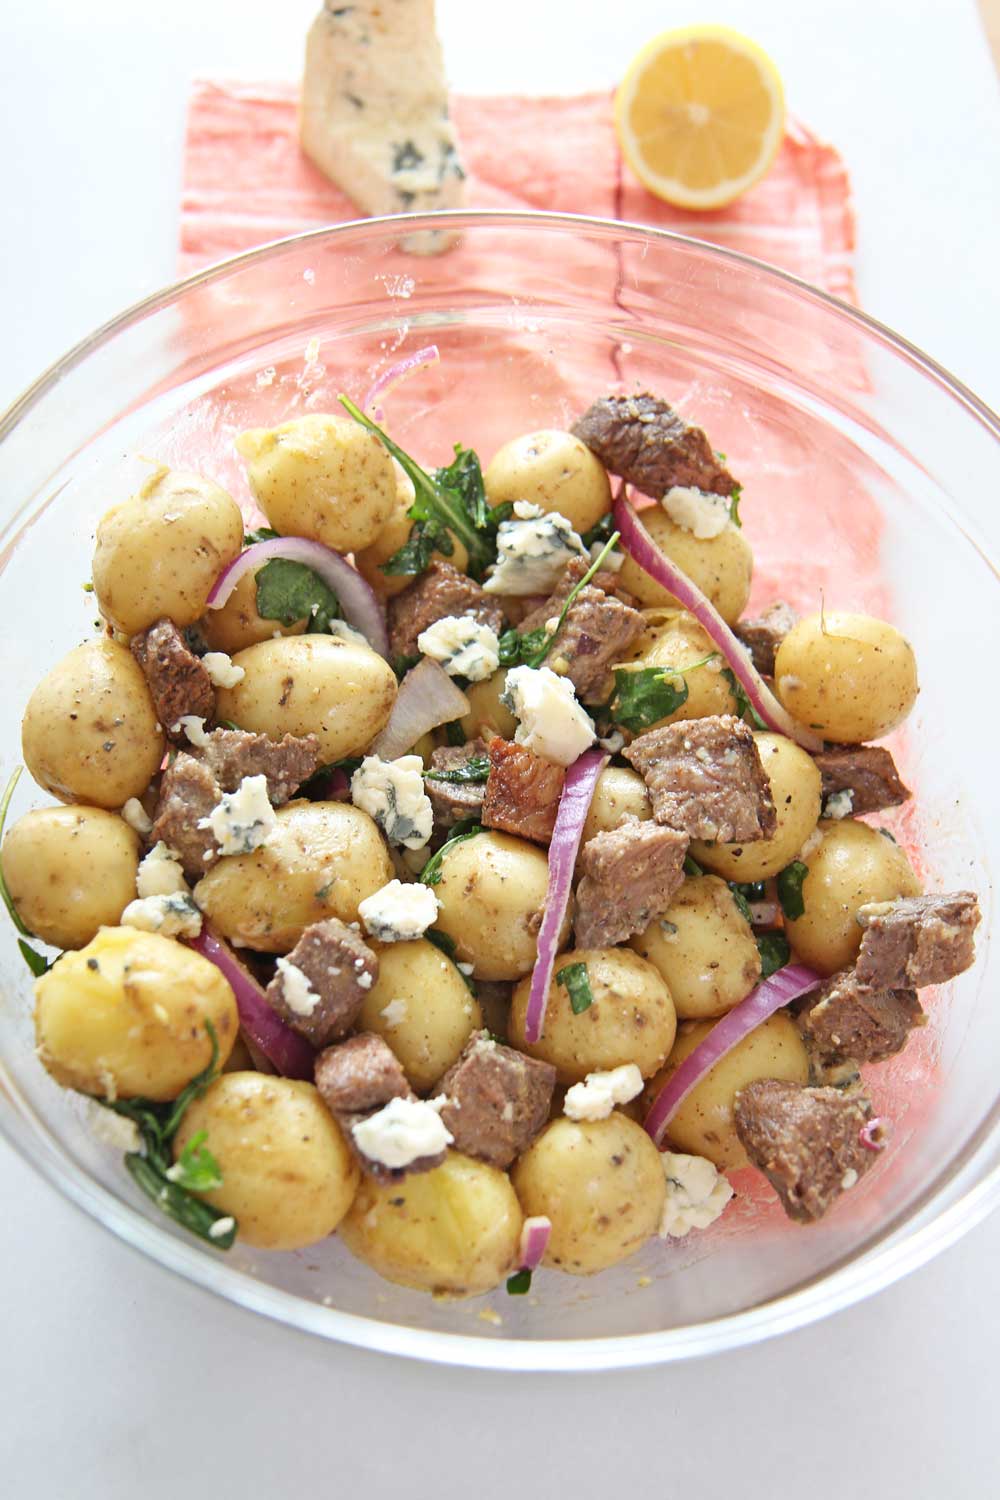 Steakhouse Steak and Potato Salad. This is a 20 minute recipe for busy weeknightt dinner. NY strip steak and Yukon gold potatoes mix with blue cheese and peppery arugula! Perfect next day leftovers. #potatosalad #leftovers